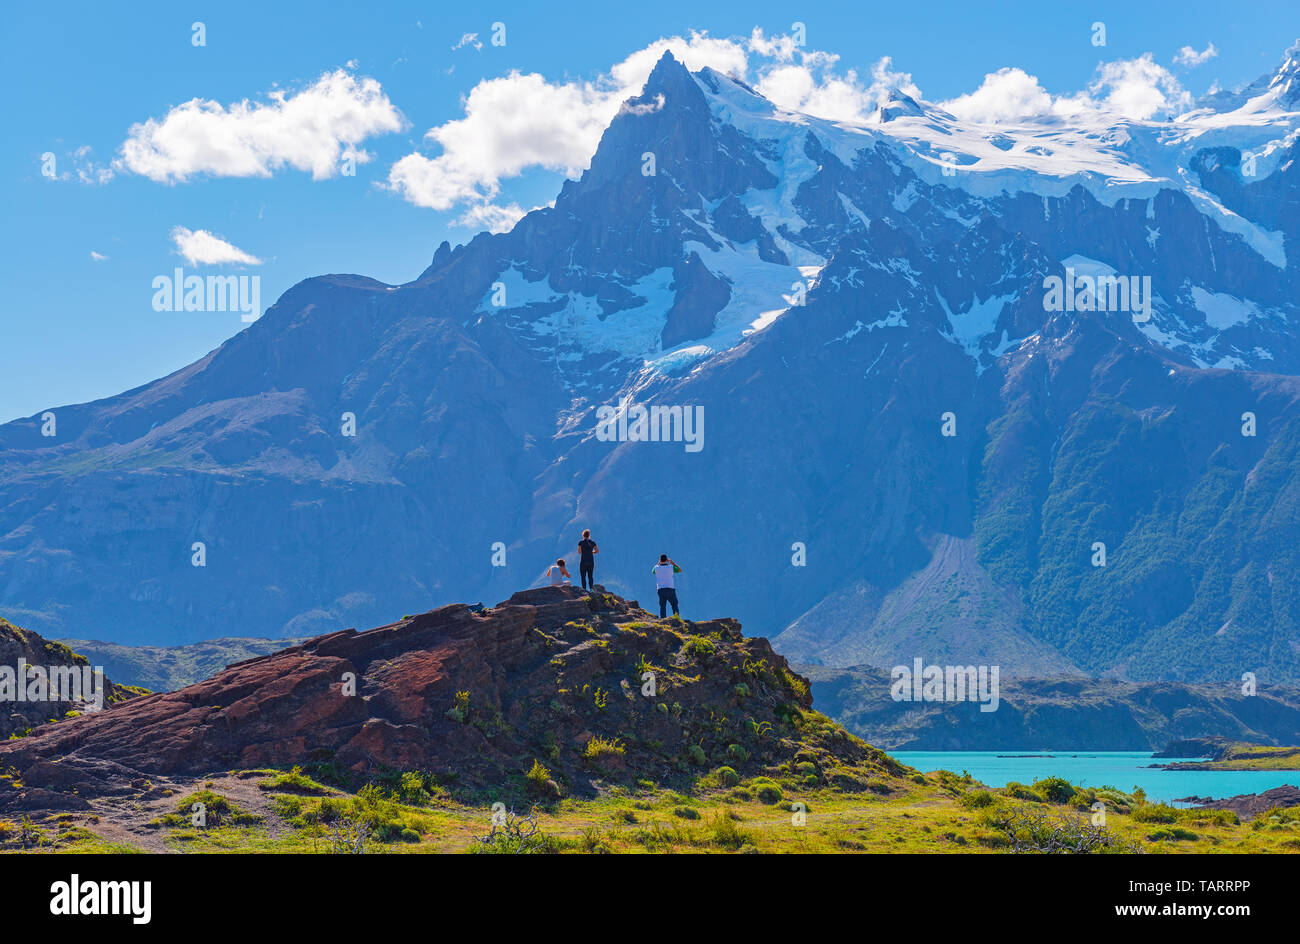 Three tourists looking upon Lake Pehoe and the Andes peaks of Torres and Cuernos del Paine, Torres del Paine national park, Patagonia, Chile. Stock Photo